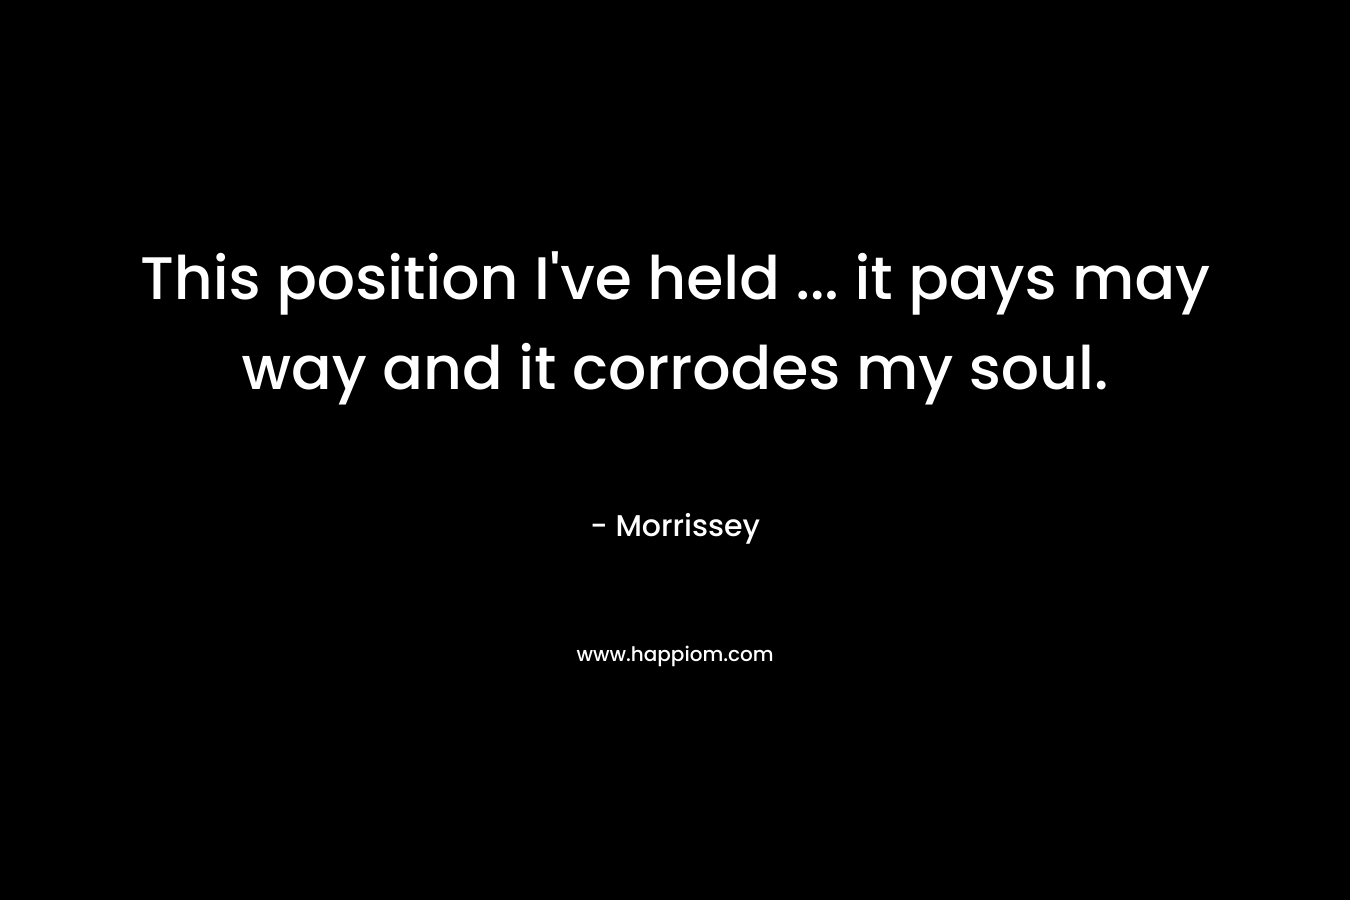 This position I’ve held … it pays may way and it corrodes my soul. – Morrissey